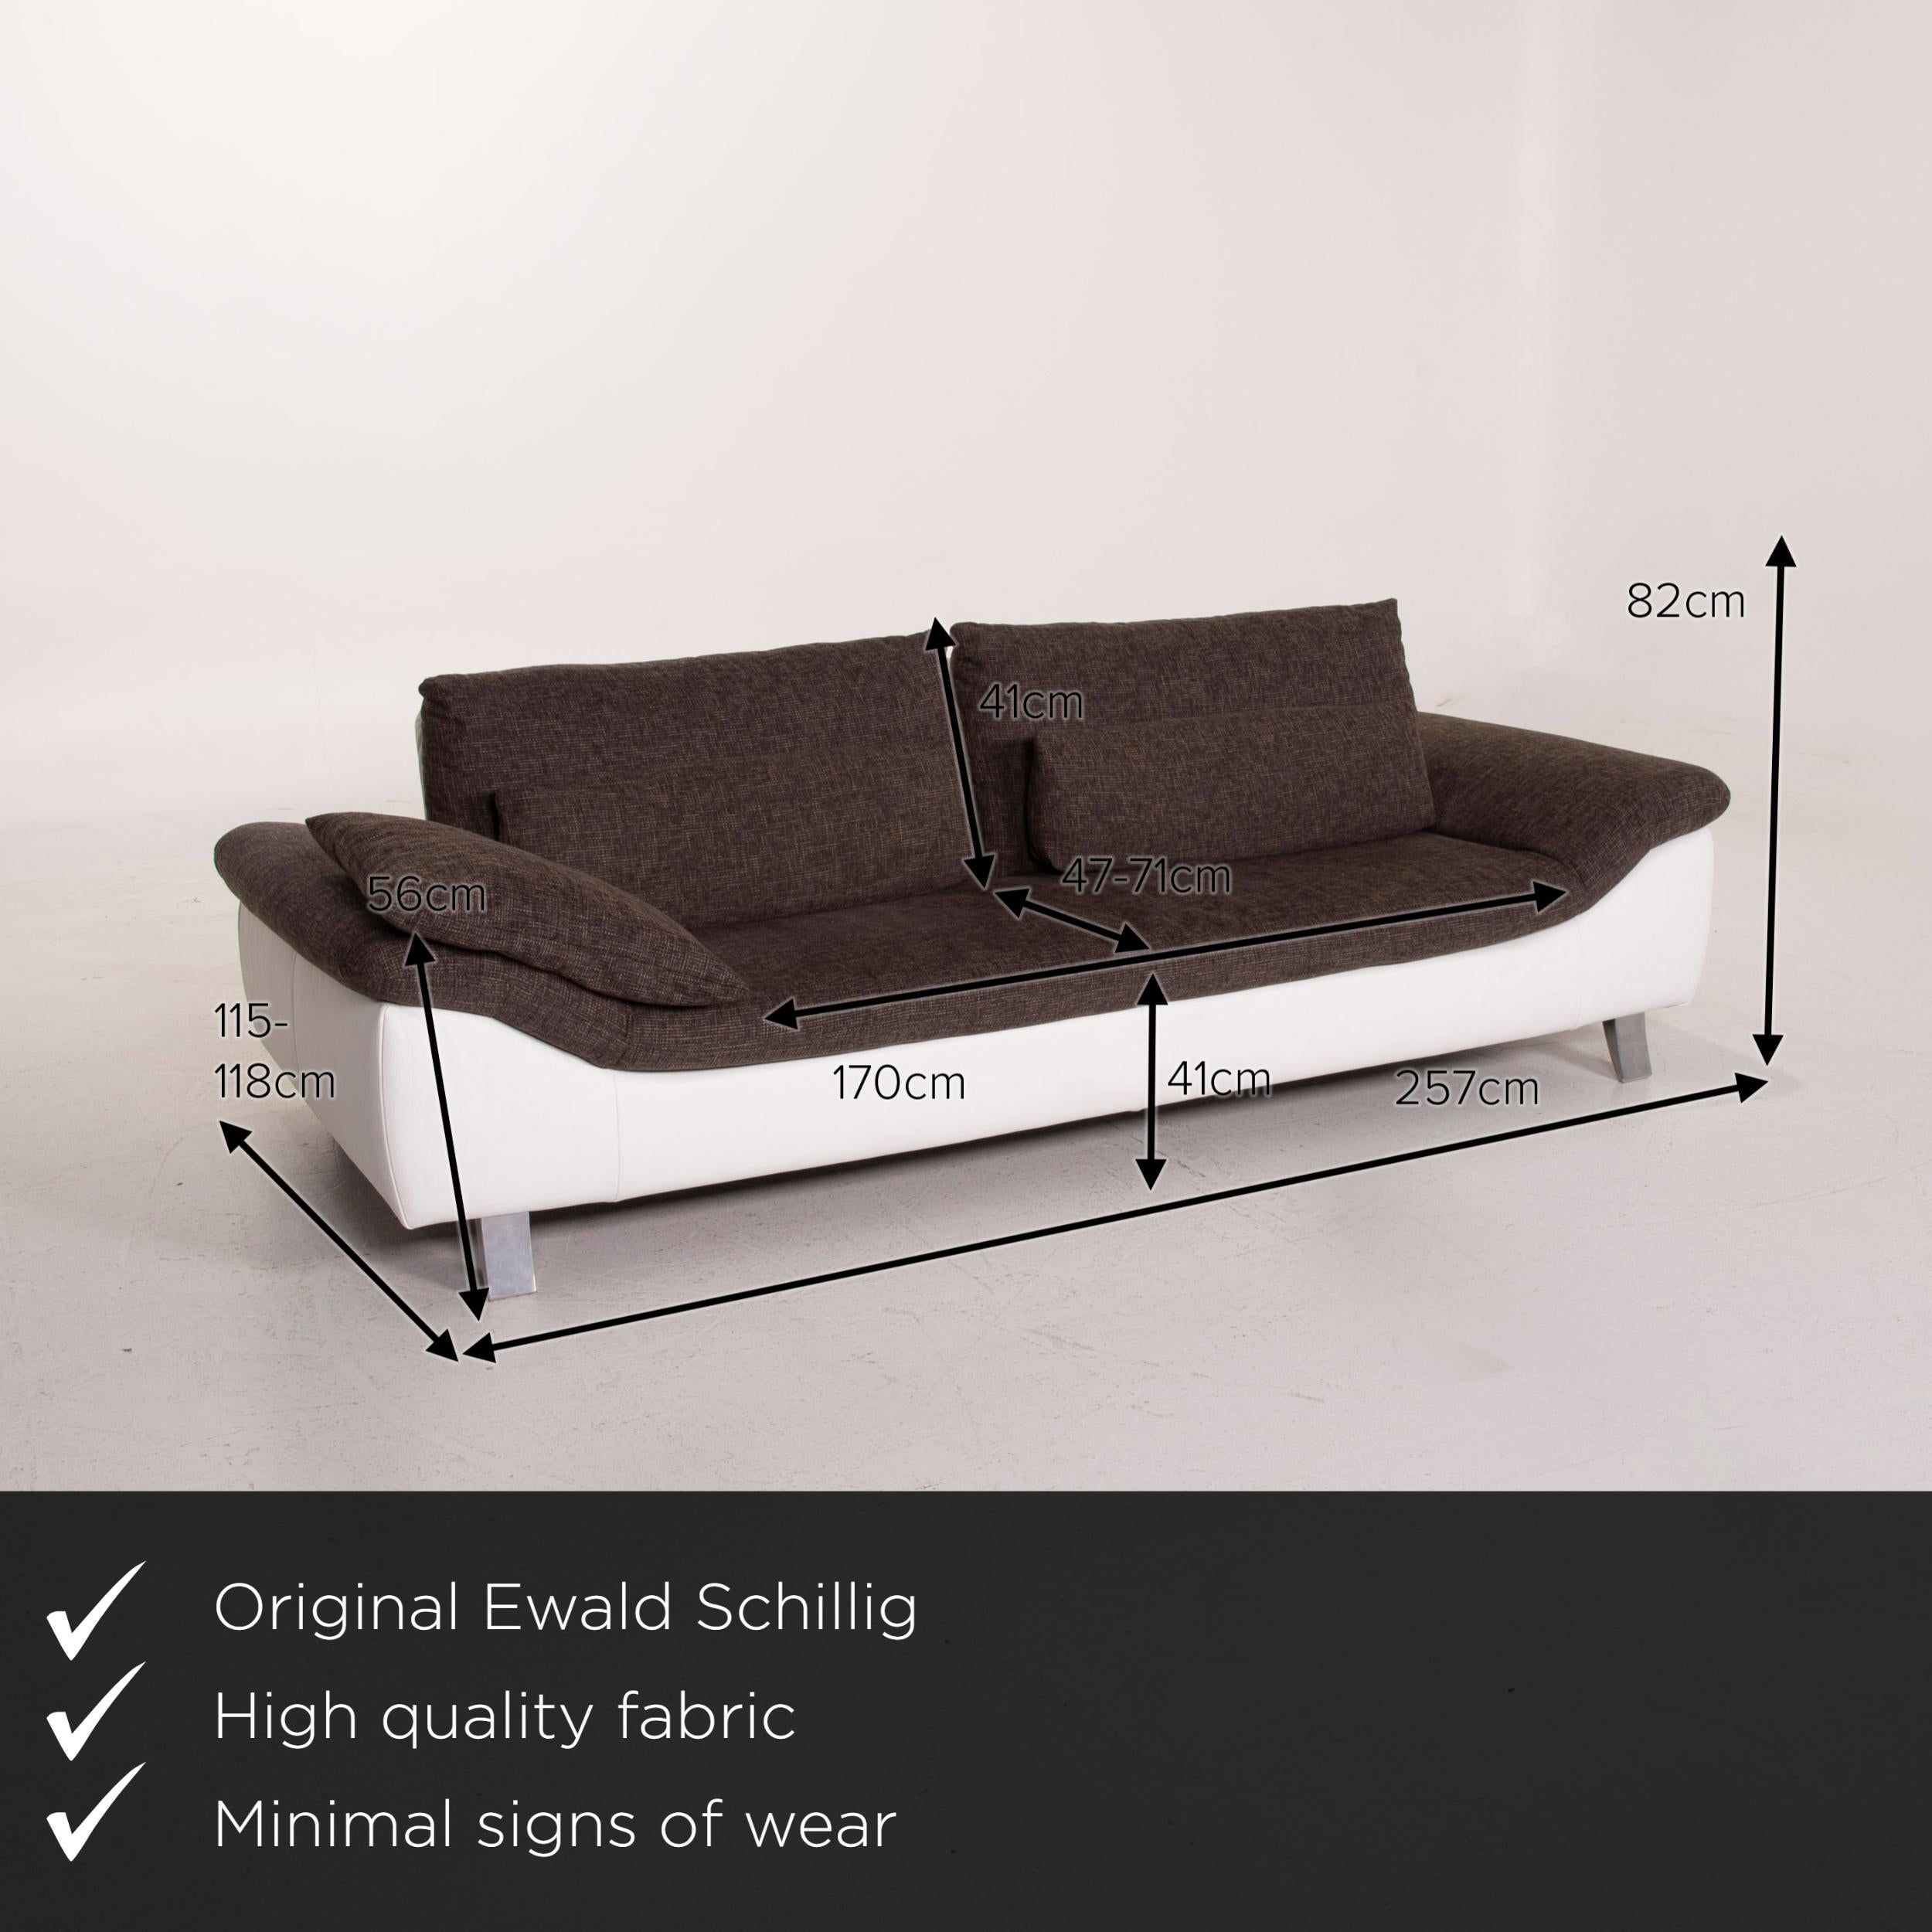 We present to you an Ewald Schillig Ameto fabric sofa brown white leather three-seat.

 

 Product measurements in centimeters:
 

Depth 115
Width 257
Height 82
Seat height 41
Rest height 56
Seat depth 47
Seat width 170
Back height 41.